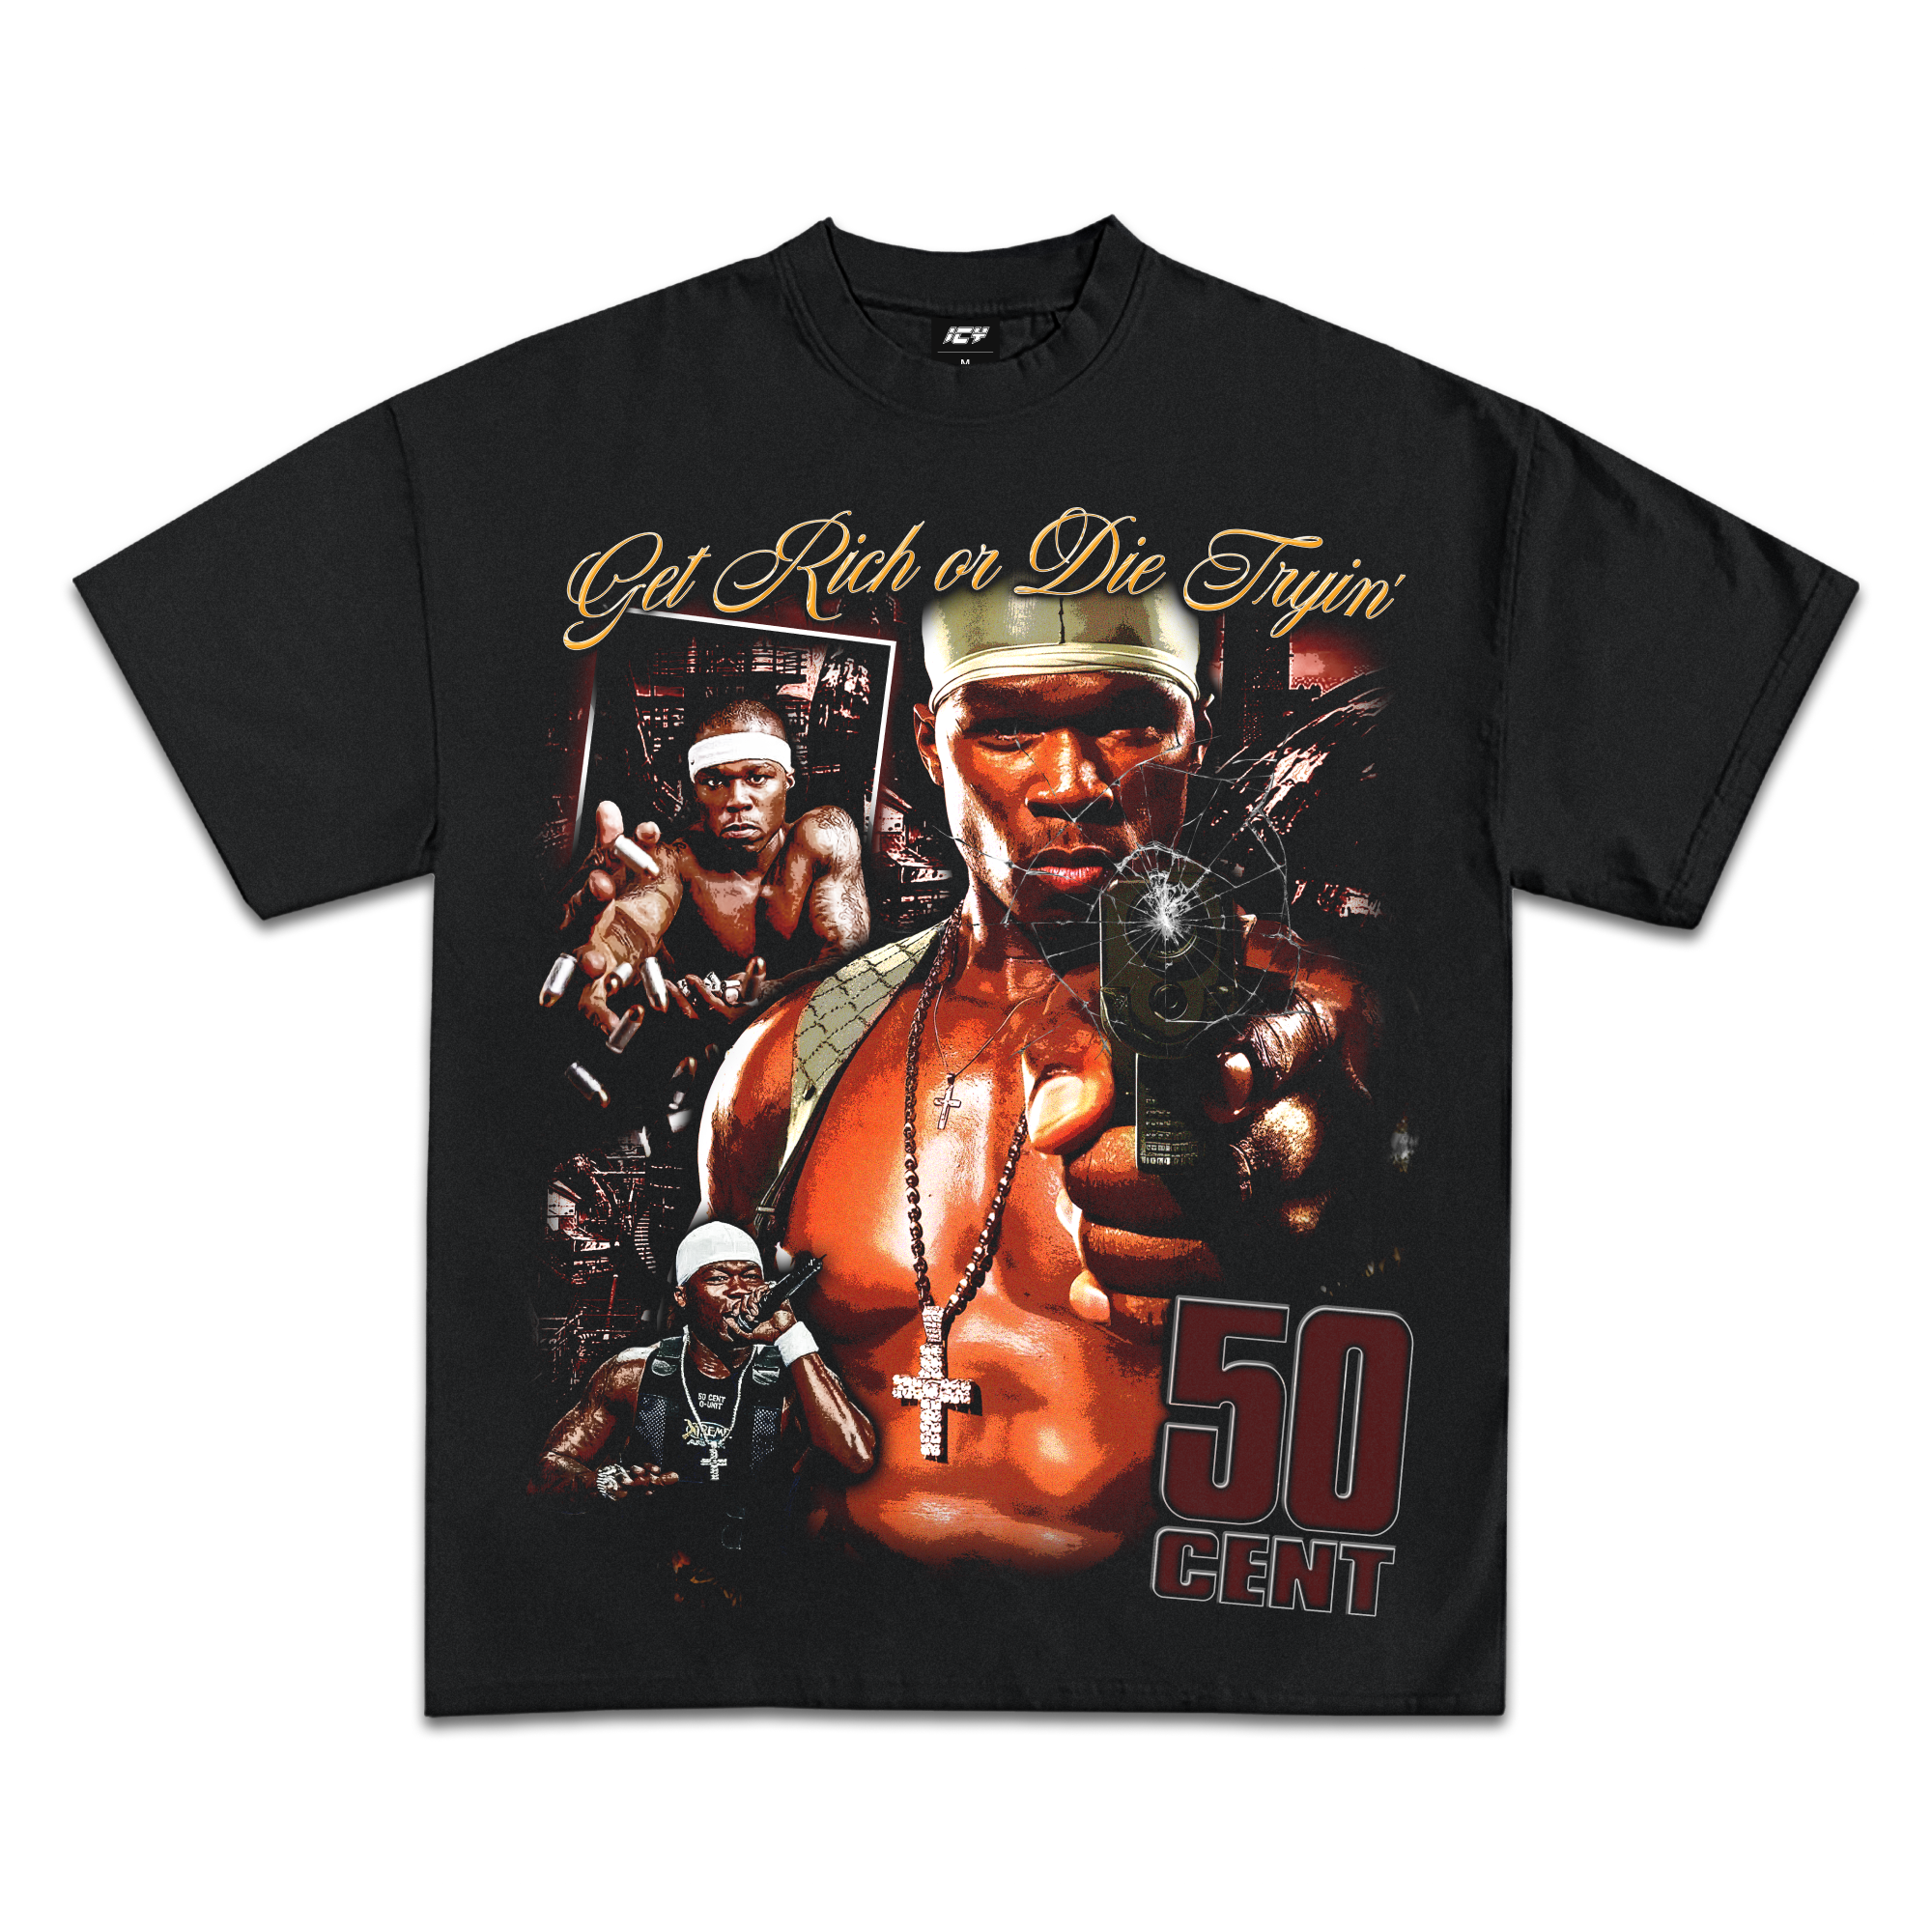 50 Cent "Get Rich or Die Tryin" Graphic T-Shirt